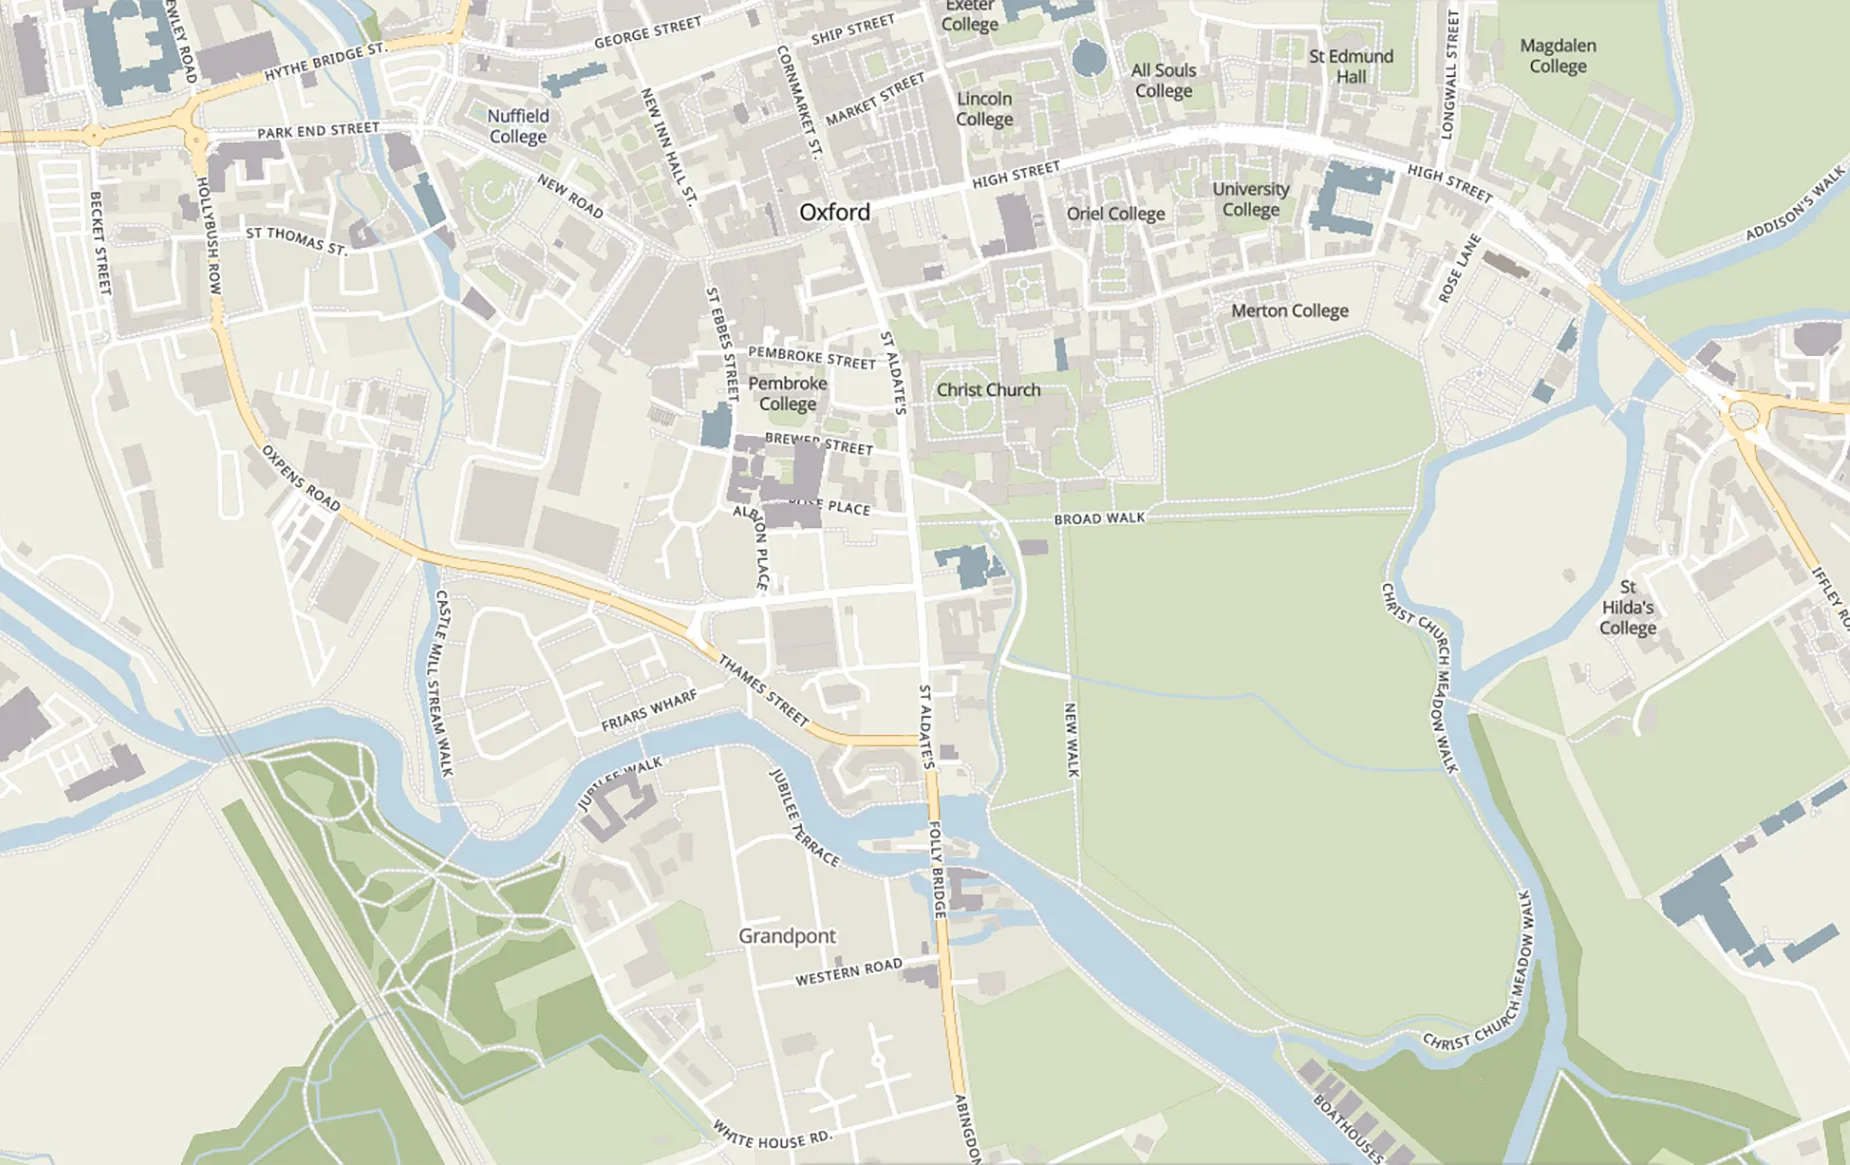 Map of Oxford, centered on Christ Church